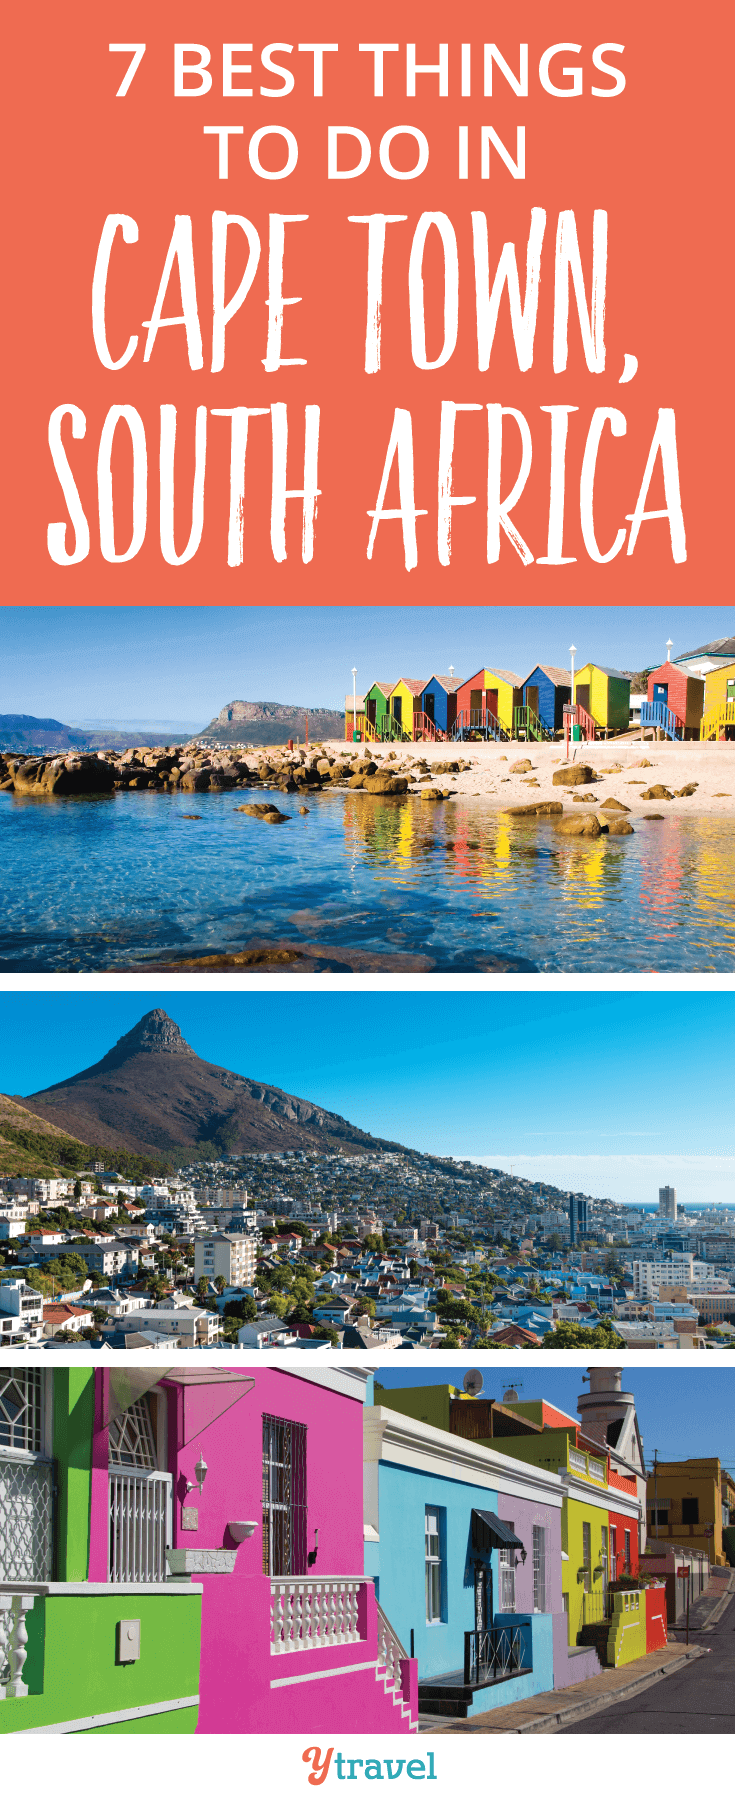 The 7 best things to do in Cape Town, South Africa. Enjoy South African wine, fine dining, hiking, visiting penguins and much more!